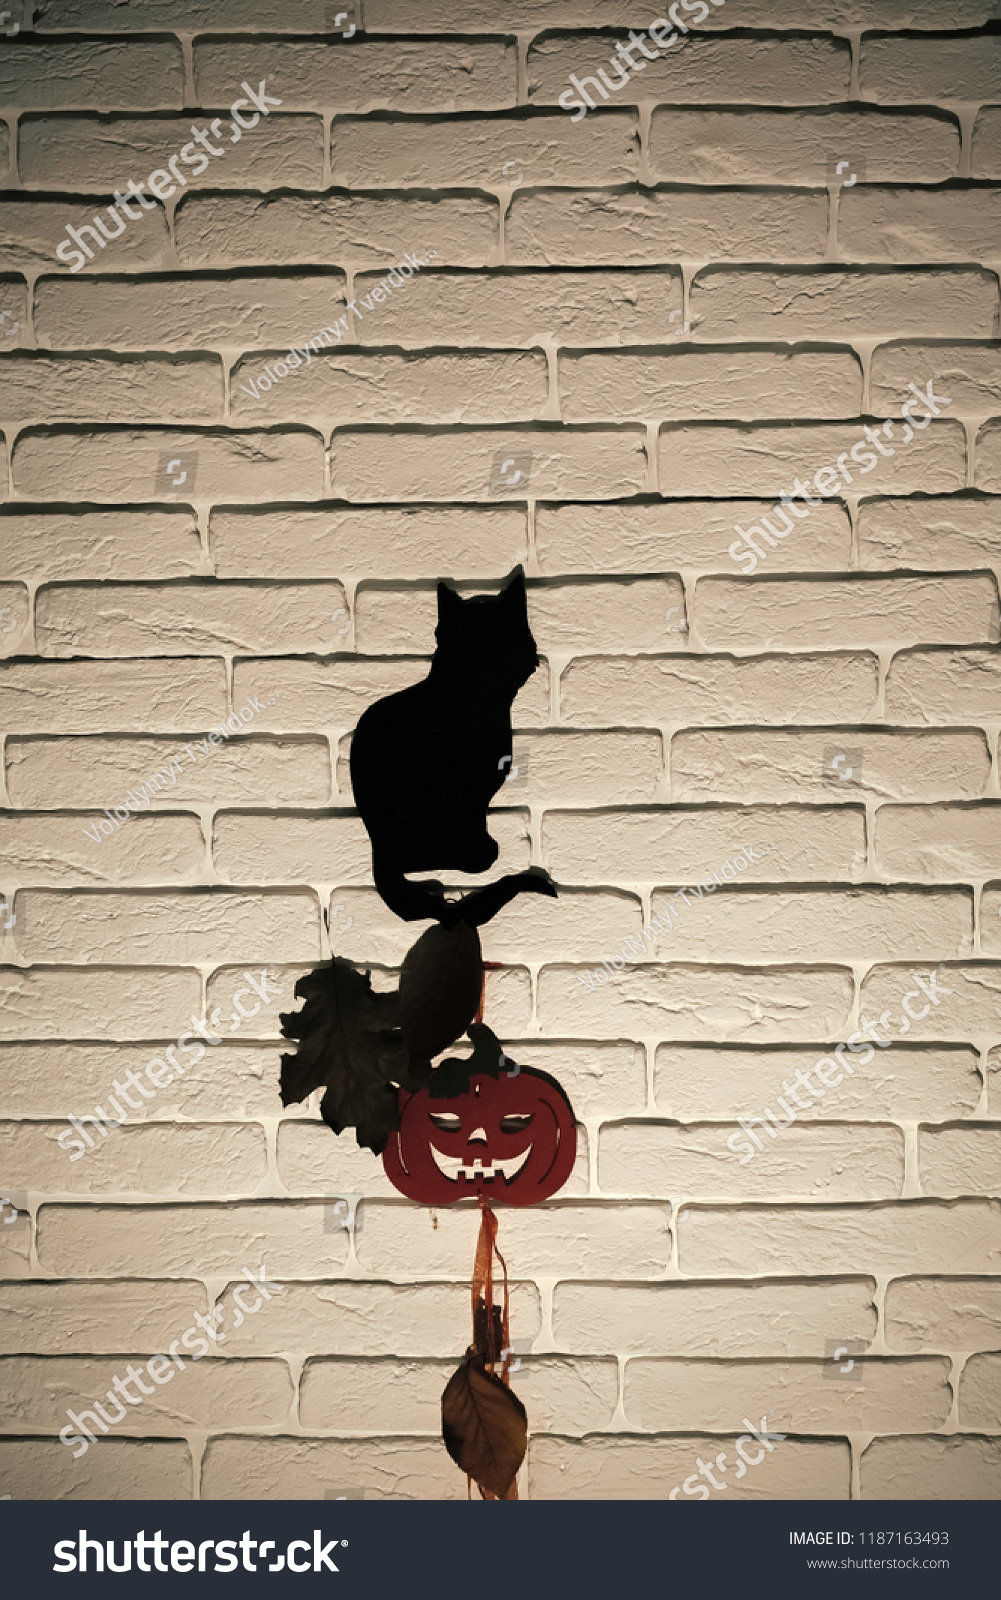 Halloween celebration concept. Black cat and orange pumpkin with tree leaves silhouettes paper cutouts on grey brick wall. Animal totem and holiday symbols. Mystery and superstition #1187163493